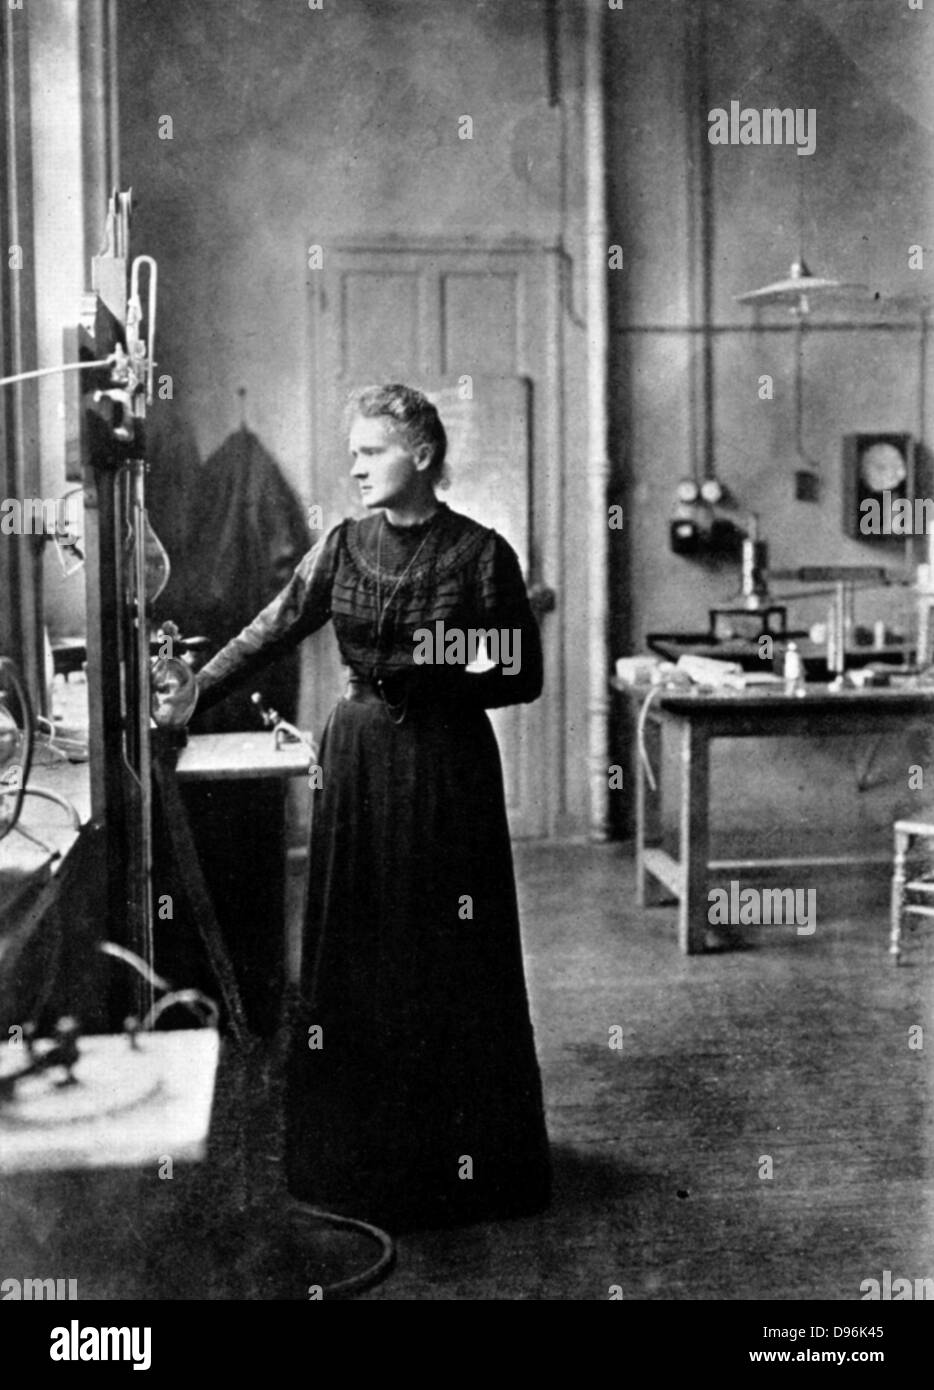 Marie Curie (1867-1934) Polish-born French physicist in her laboratory, 1912, the year after she was awarded her second Nobel prize (for chemistry).  Awarded Nobel prize for physics in 1903 jointly with her husband, Pierre, and Henri Becquerel. Stock Photo